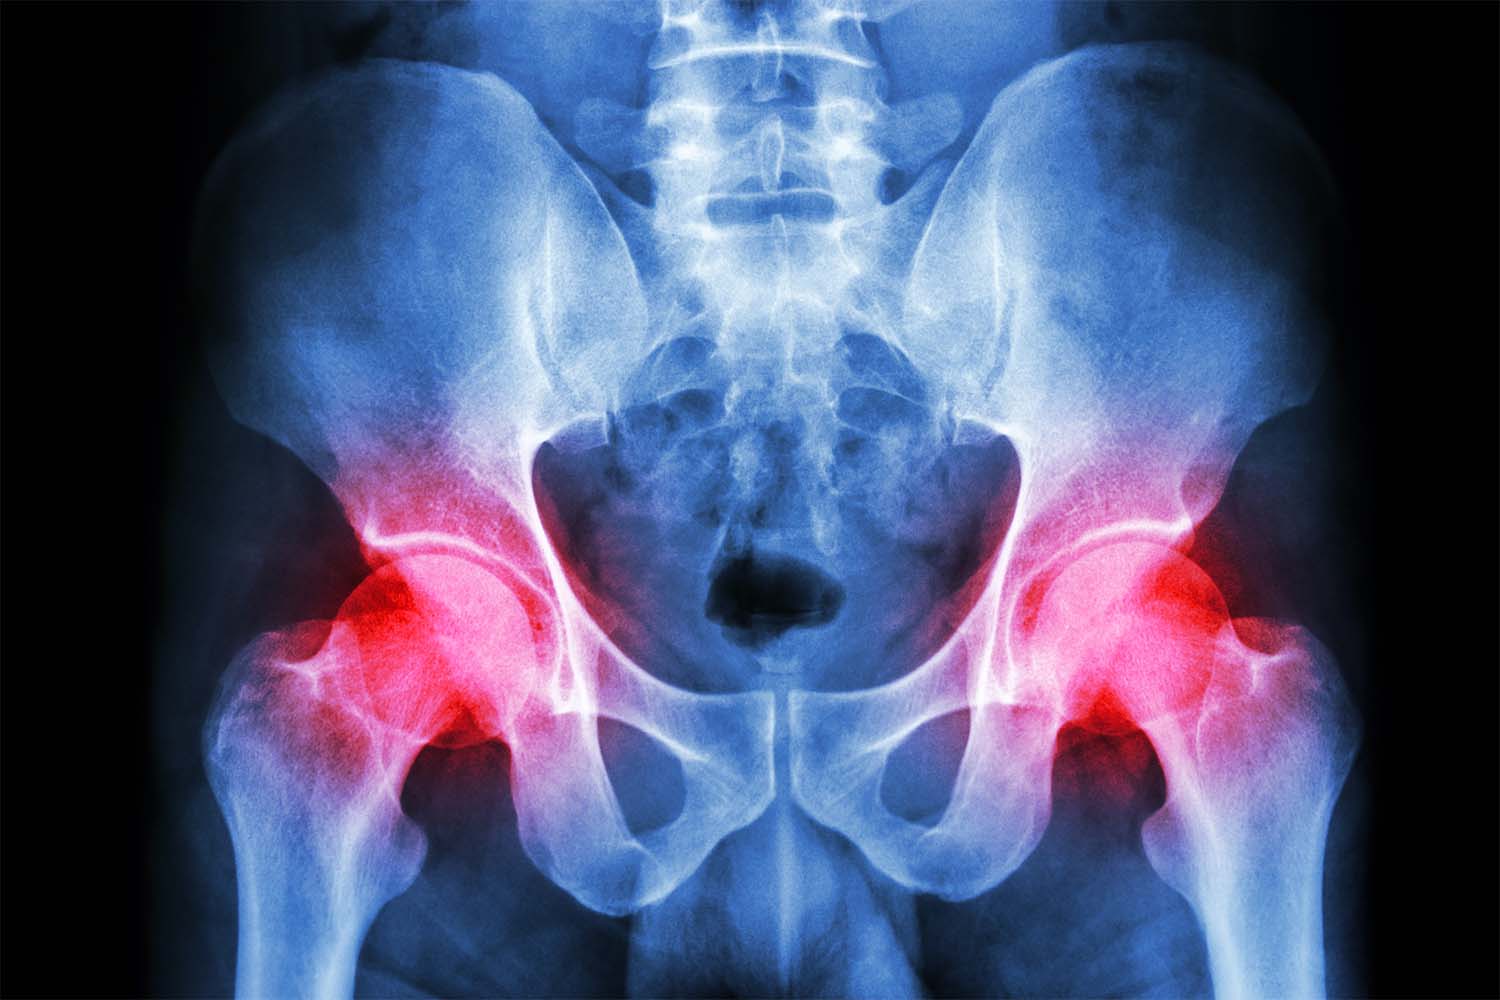 VA Disability Rating for Hip Pain Secondary to Back Injury